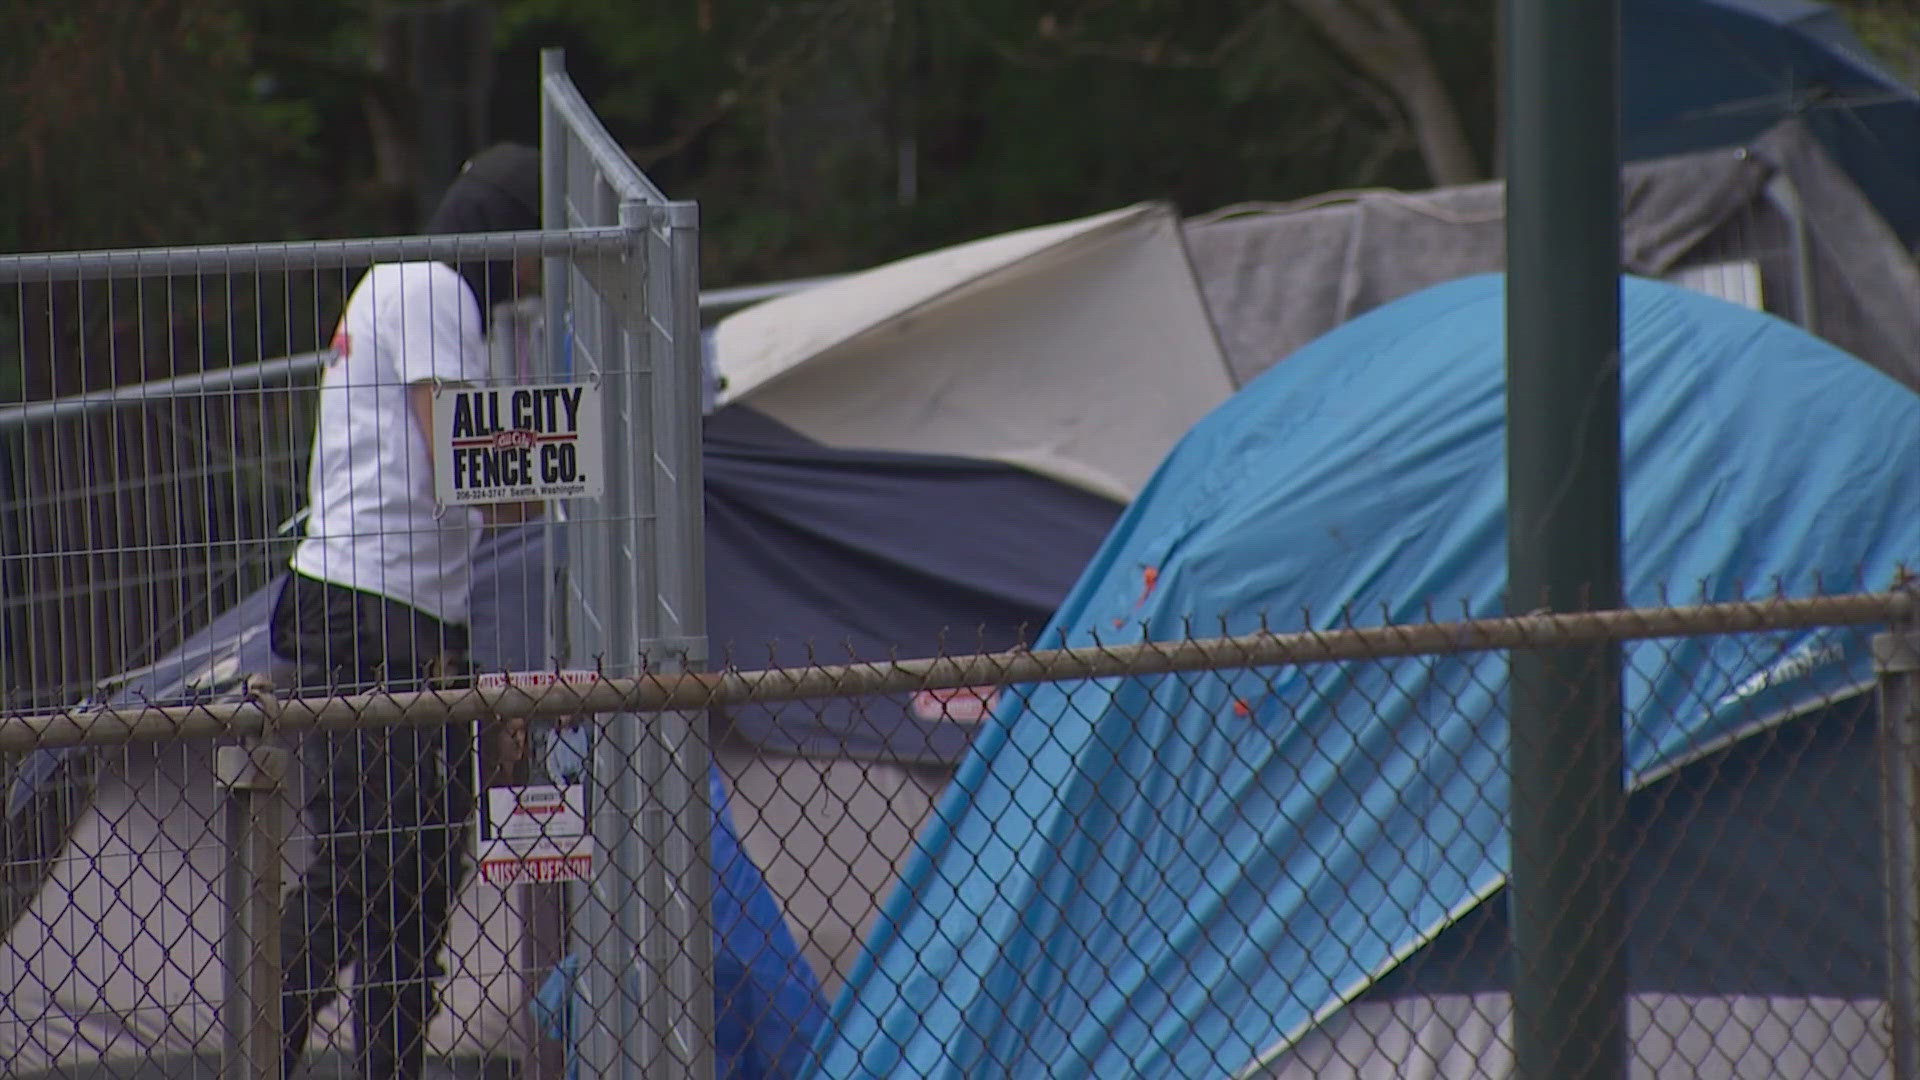 The U.S. Supreme Court ruled that cities can enforce bans on homeless people camping in public areas. This is as Burien's camping law is being challenged.